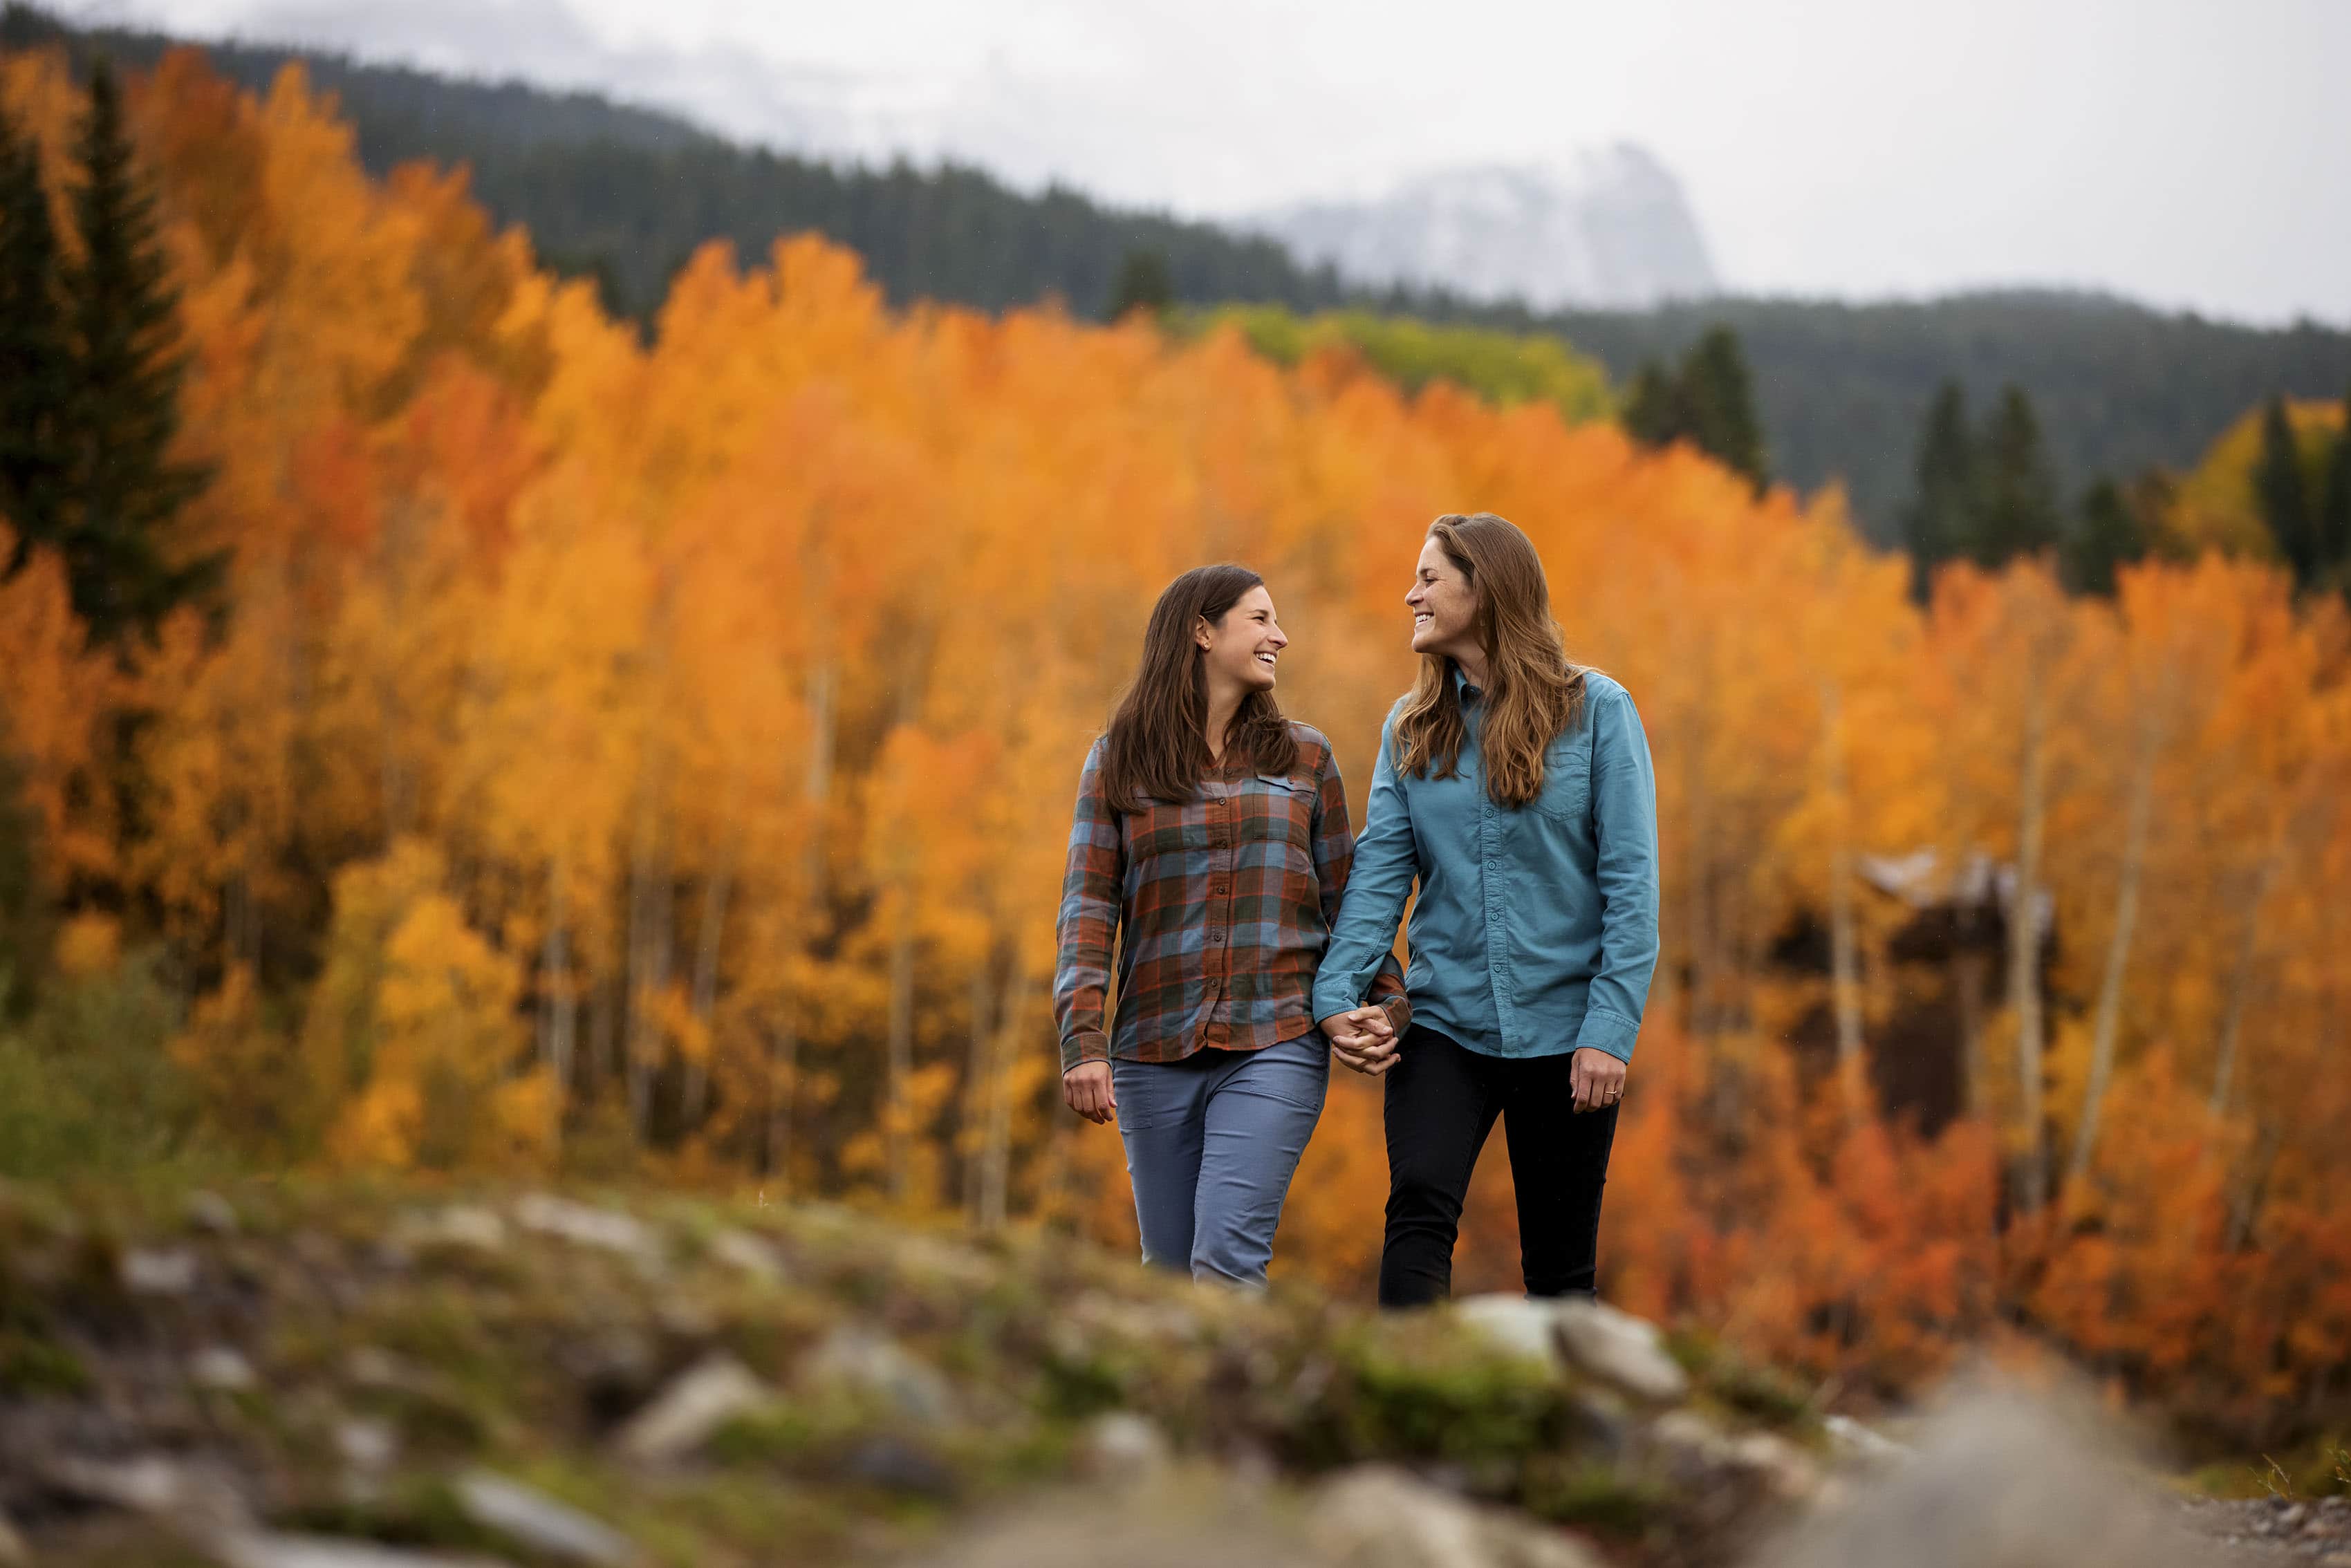 Cait and Anna walk together near golden aspen trees in Ophir